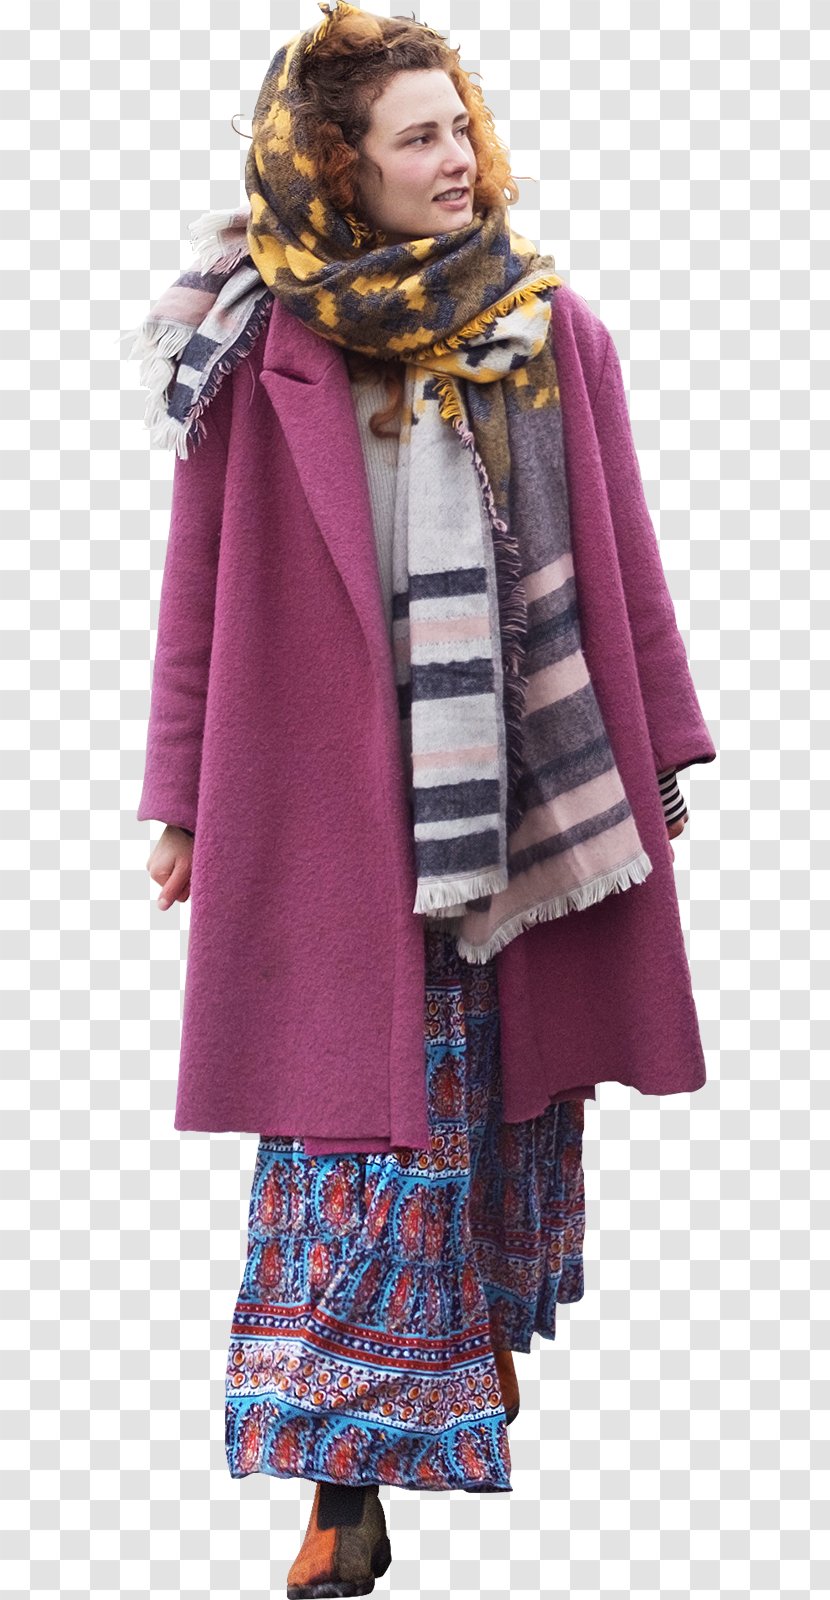 Scarf Clothing Outerwear Coat - Violet - Barbecue Grill Transparent PNG